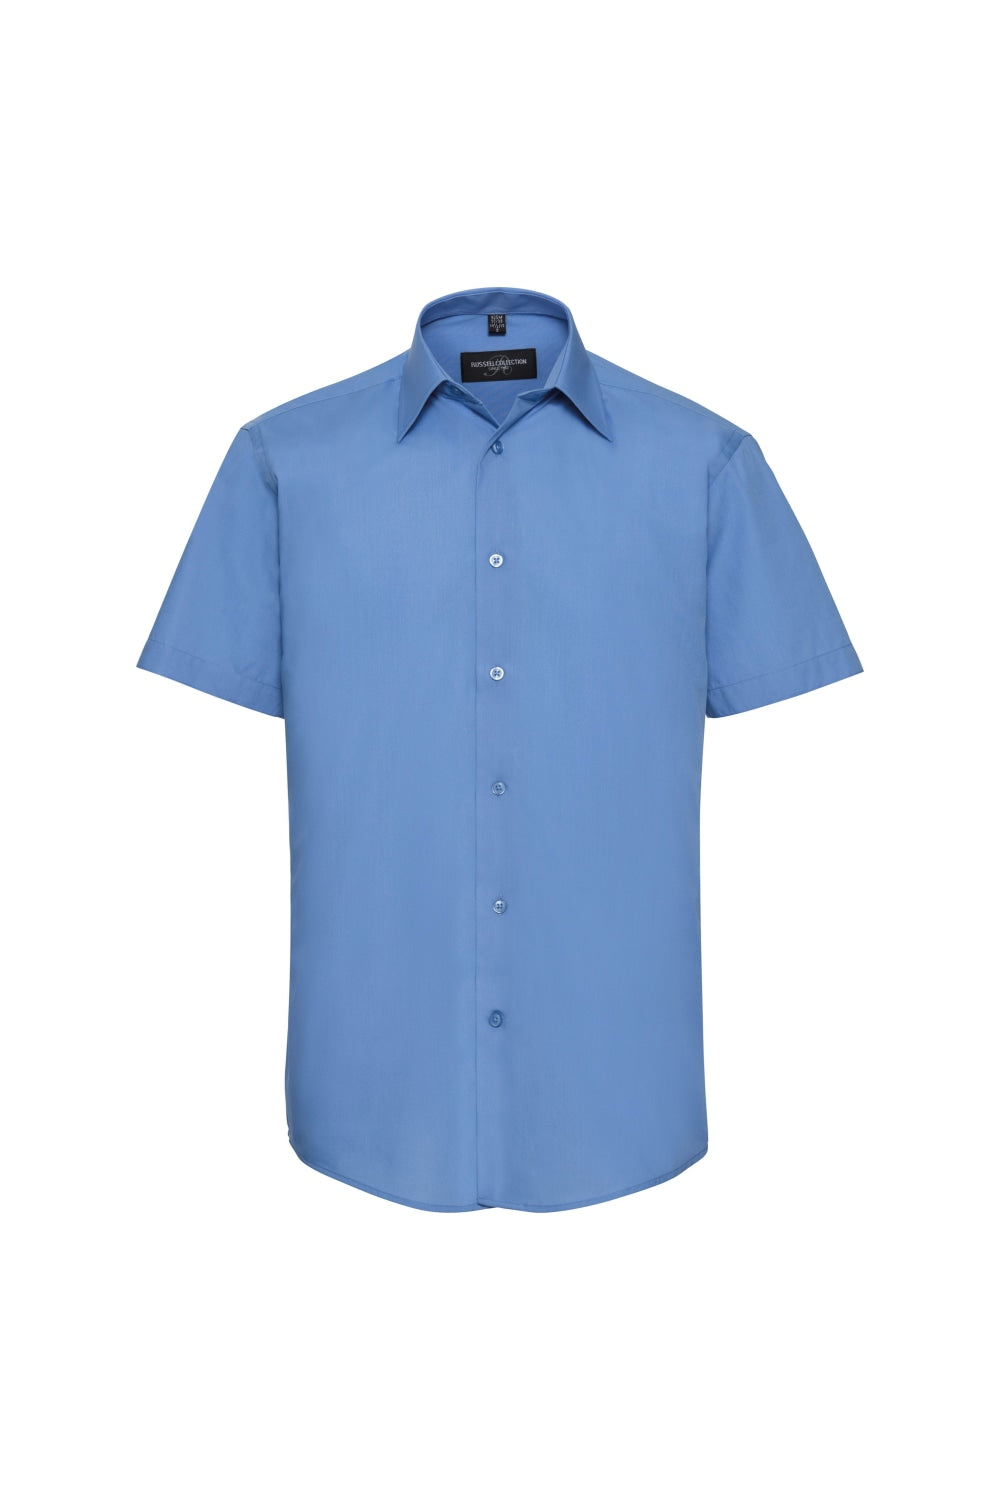 Russell Collection Mens Short Sleeve Poly-Cotton Easy Care Tailored Poplin Shirt (Corporate Blue)